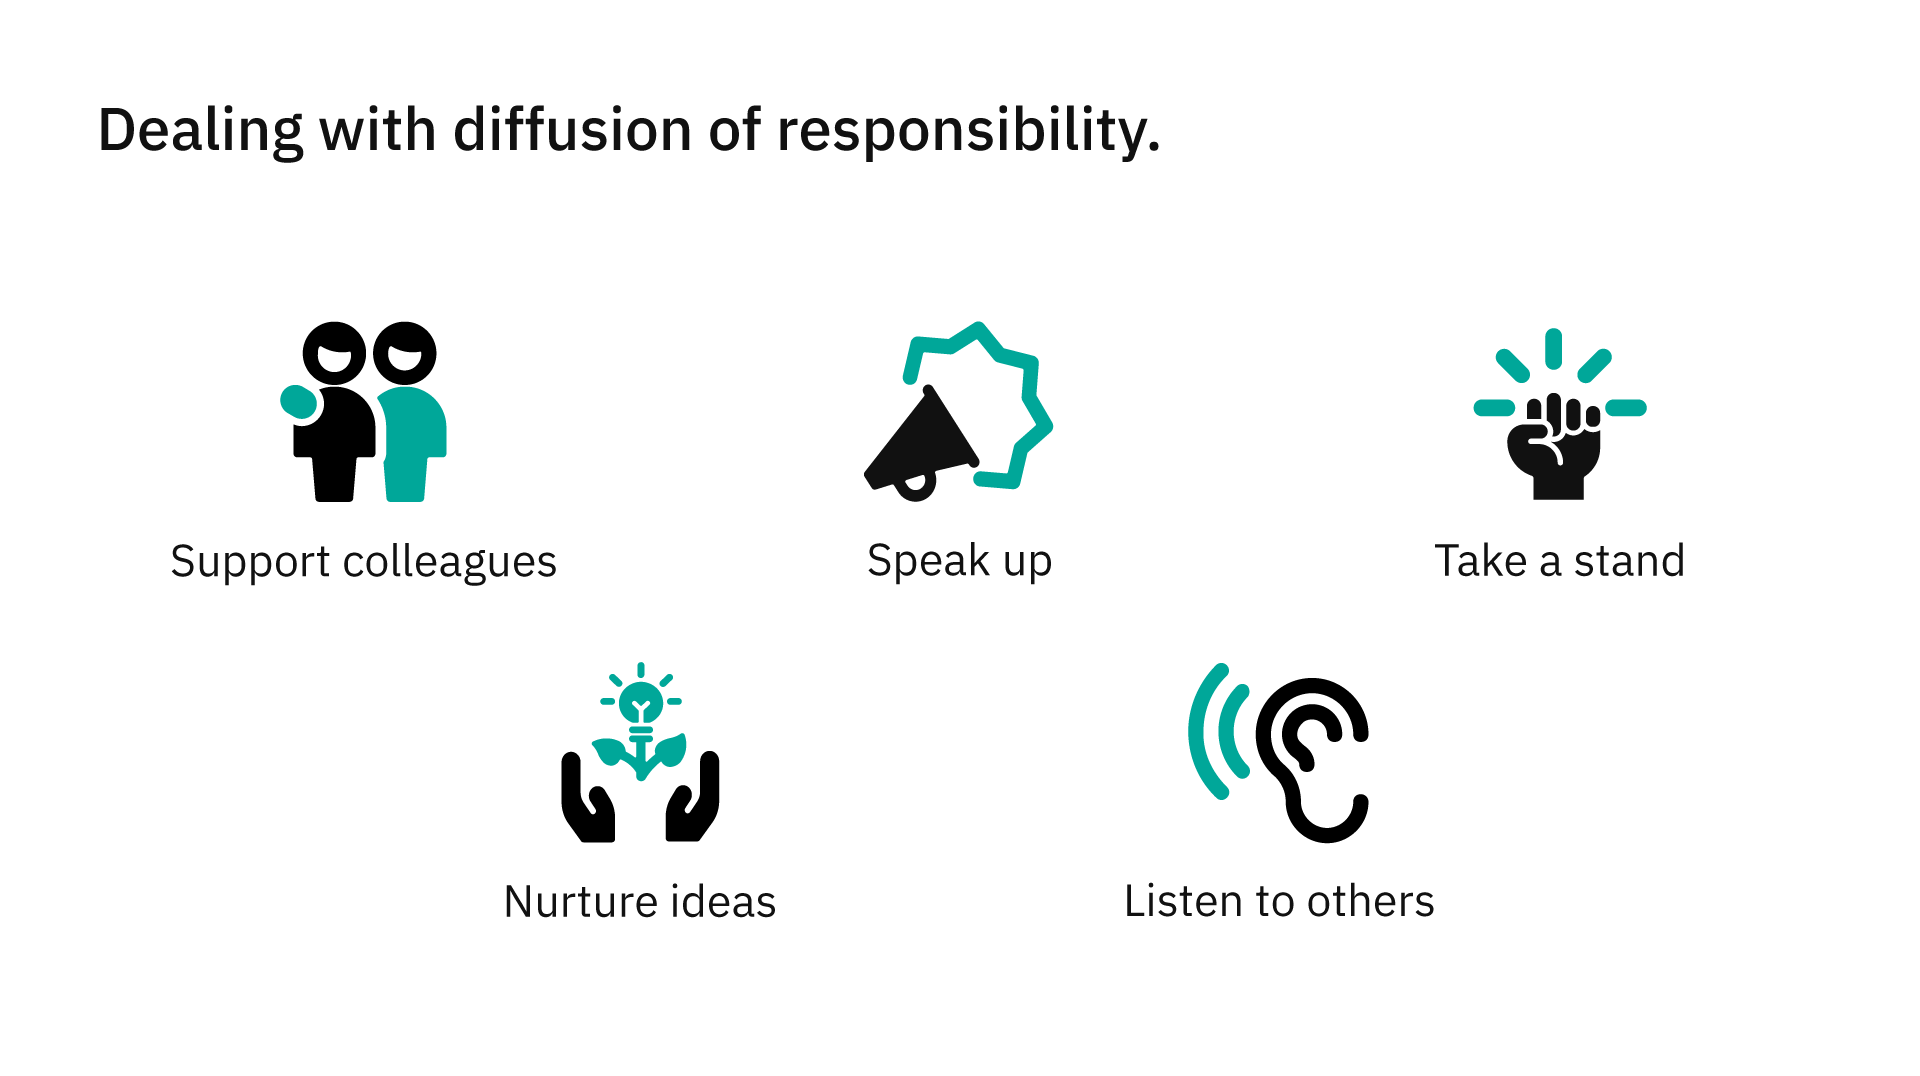 How to deal with diffusion of responsibility